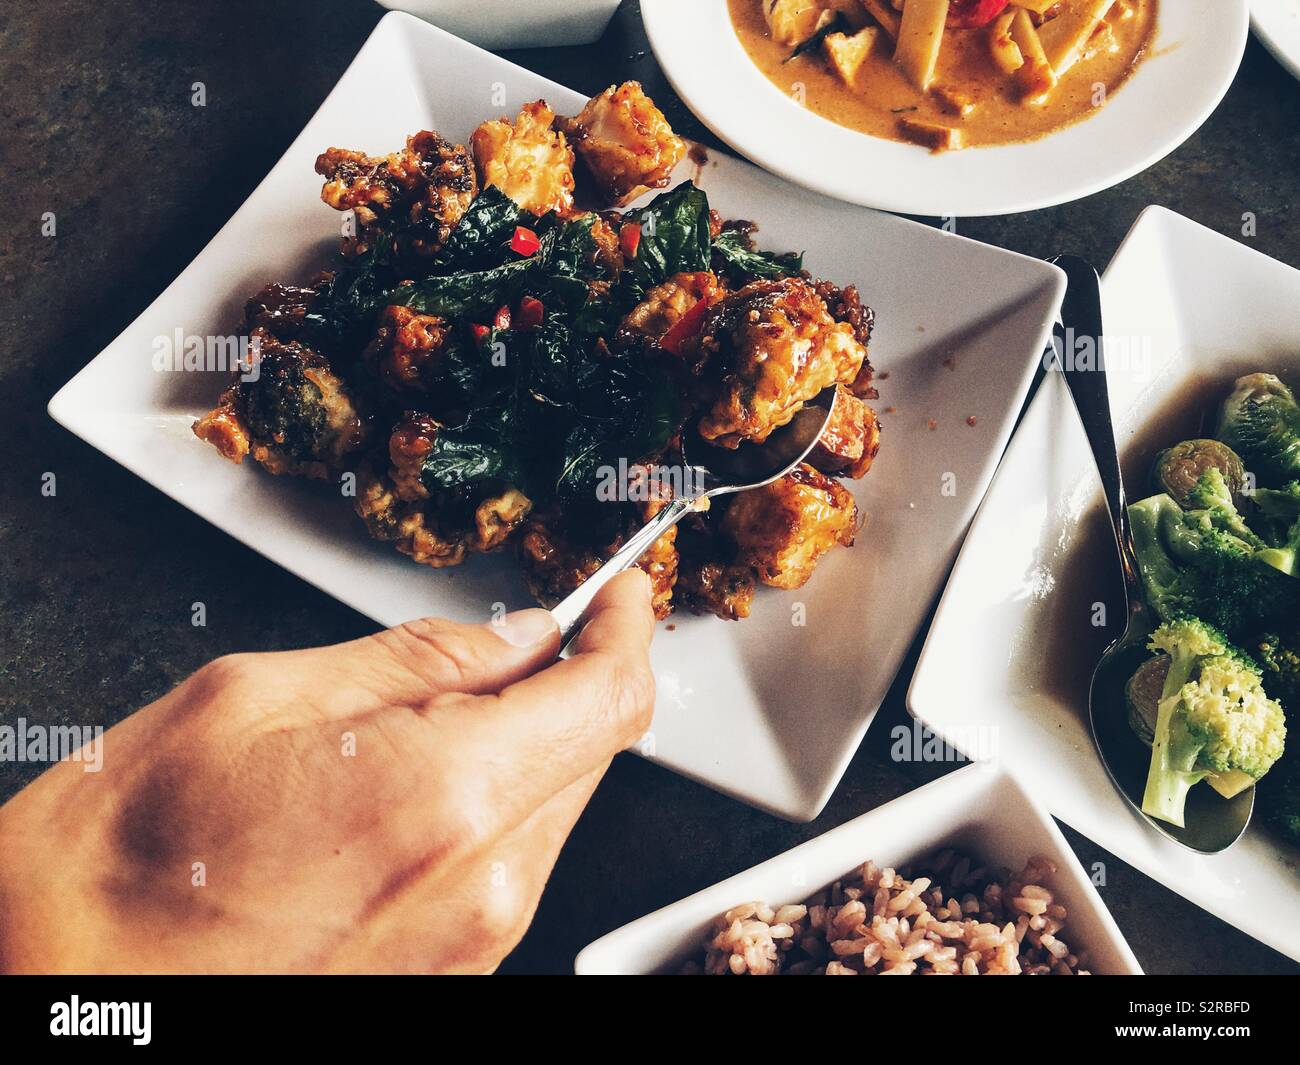 A scrumptious vegan meal on the table Stock Photo